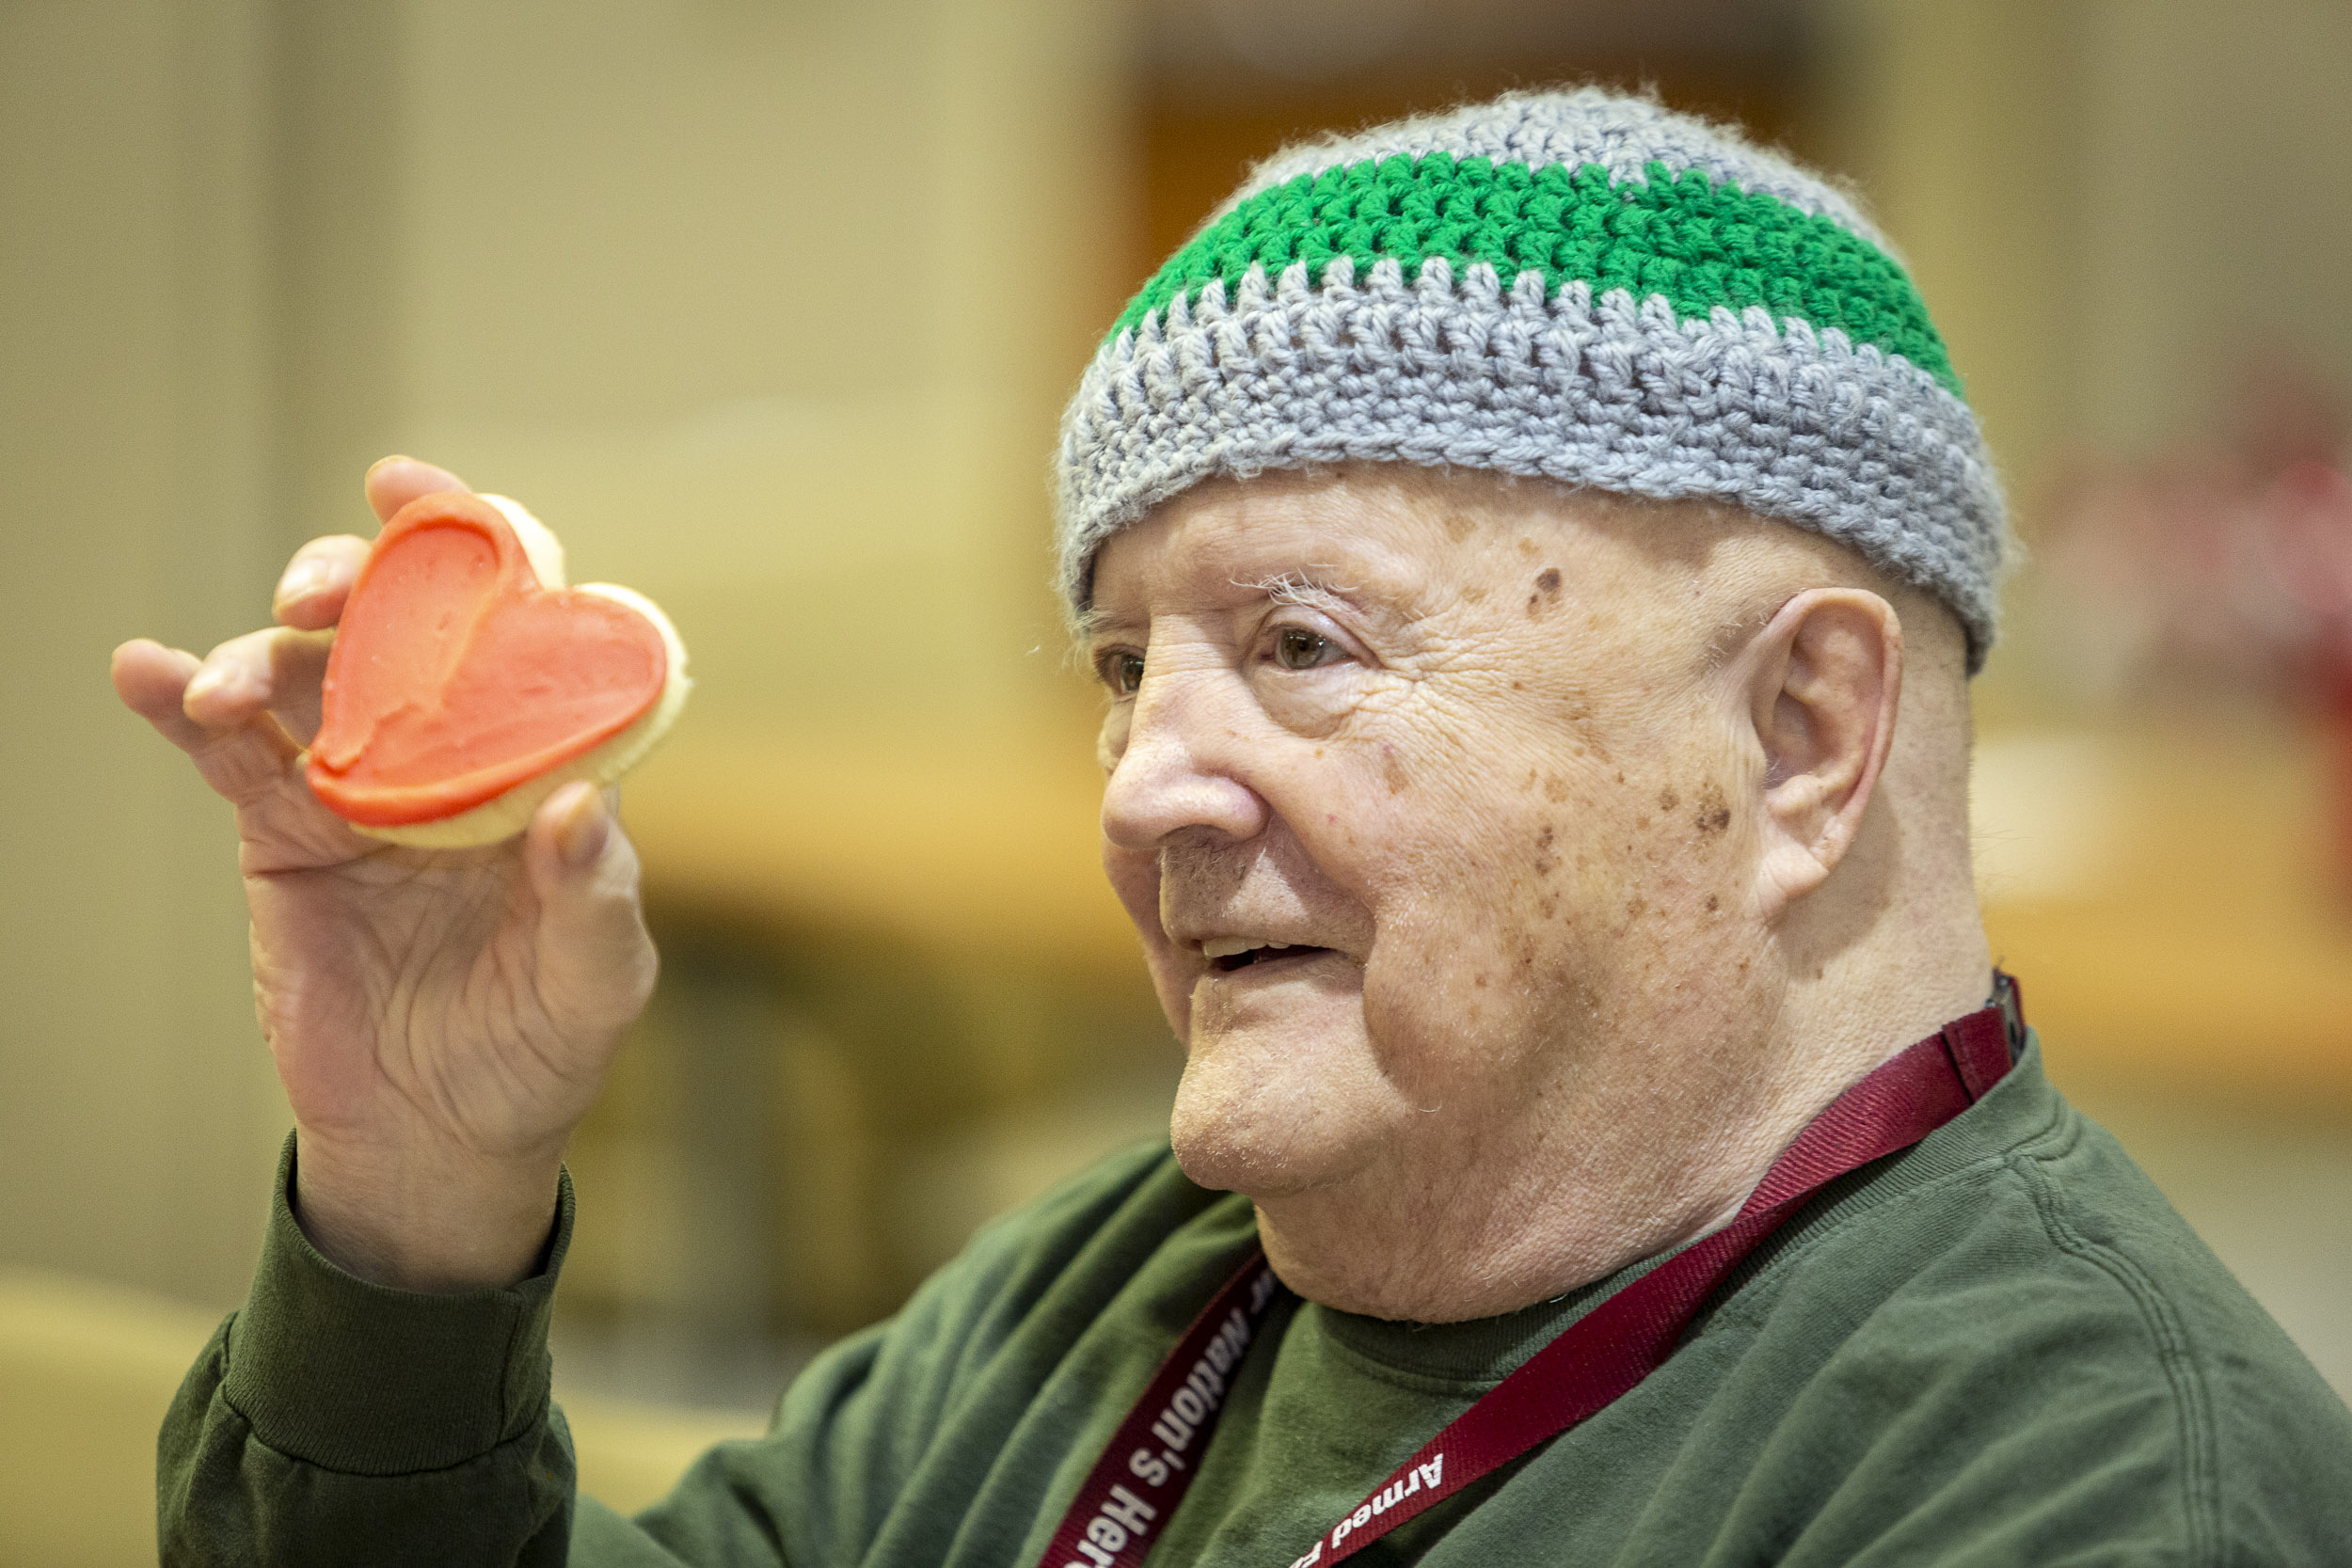  A military veteran enjoys Cheryl's Cookies at the Armed Forces Retirement Home on Valentine’s Day on Thursday, Feb. 14, 2019 in Washington, DC. 